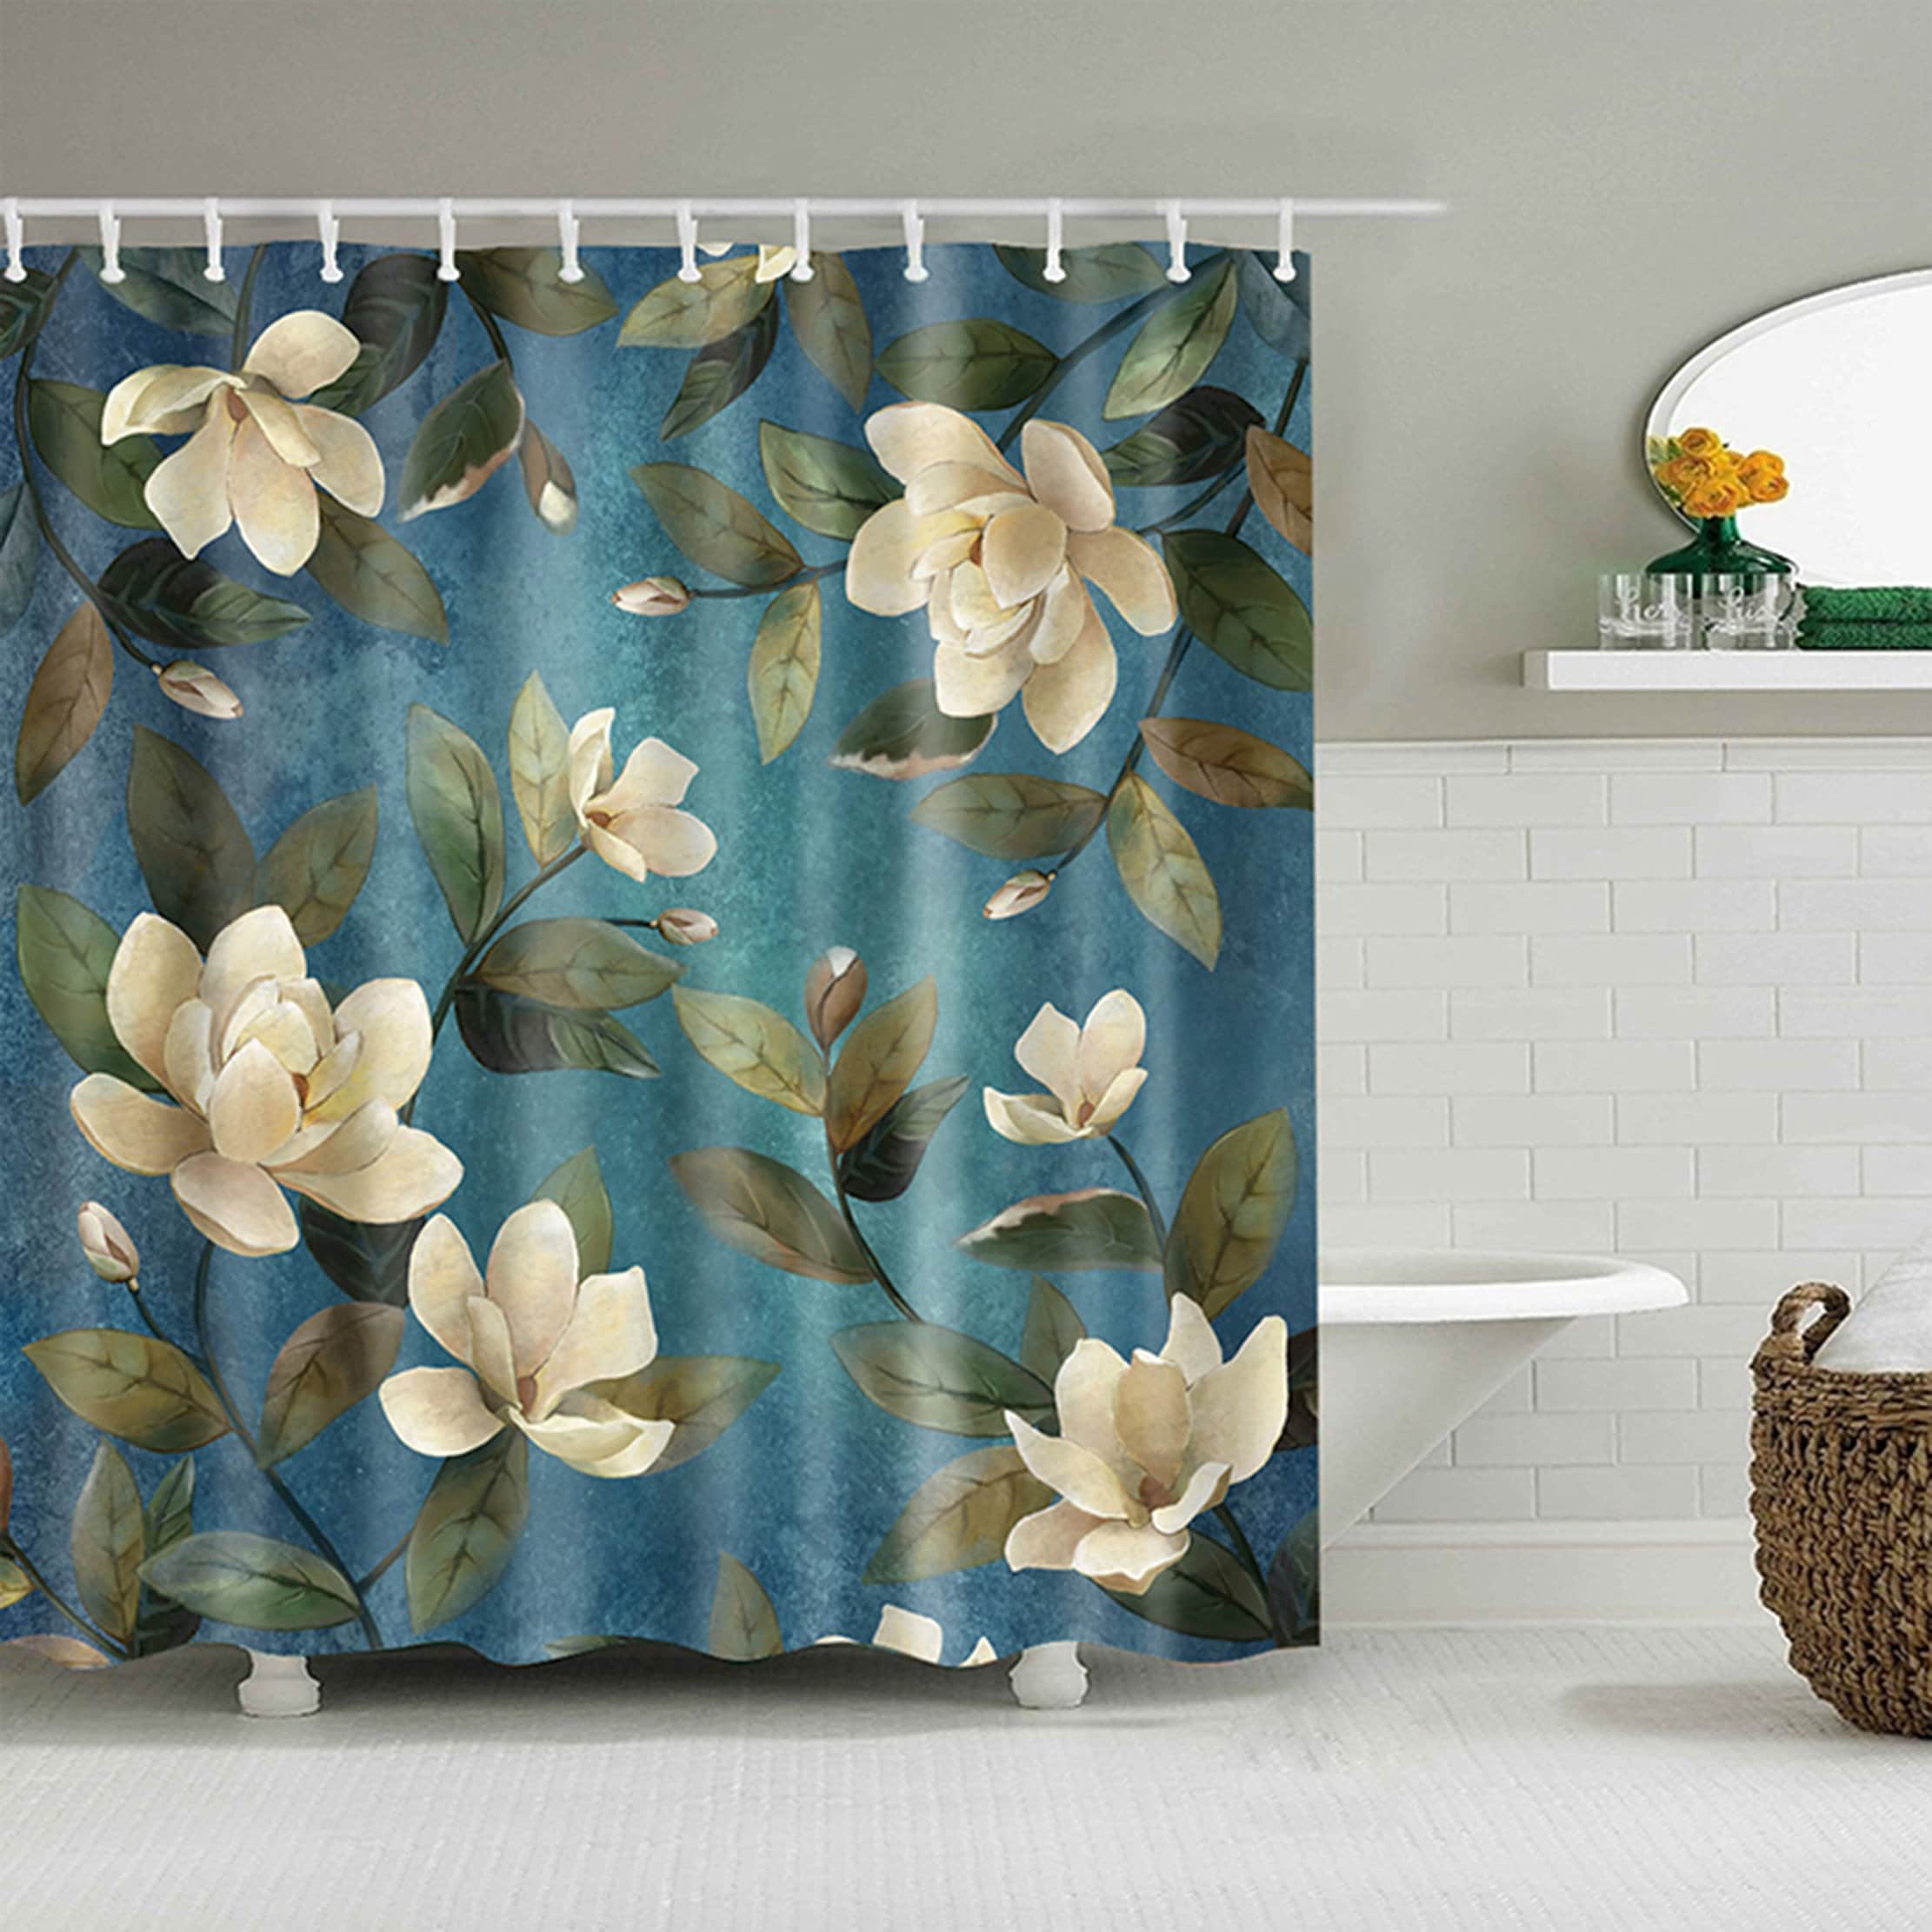 Colorful Flowers Floral Waterproof Fabric Shower Curtain Set Bathroom Accessory 